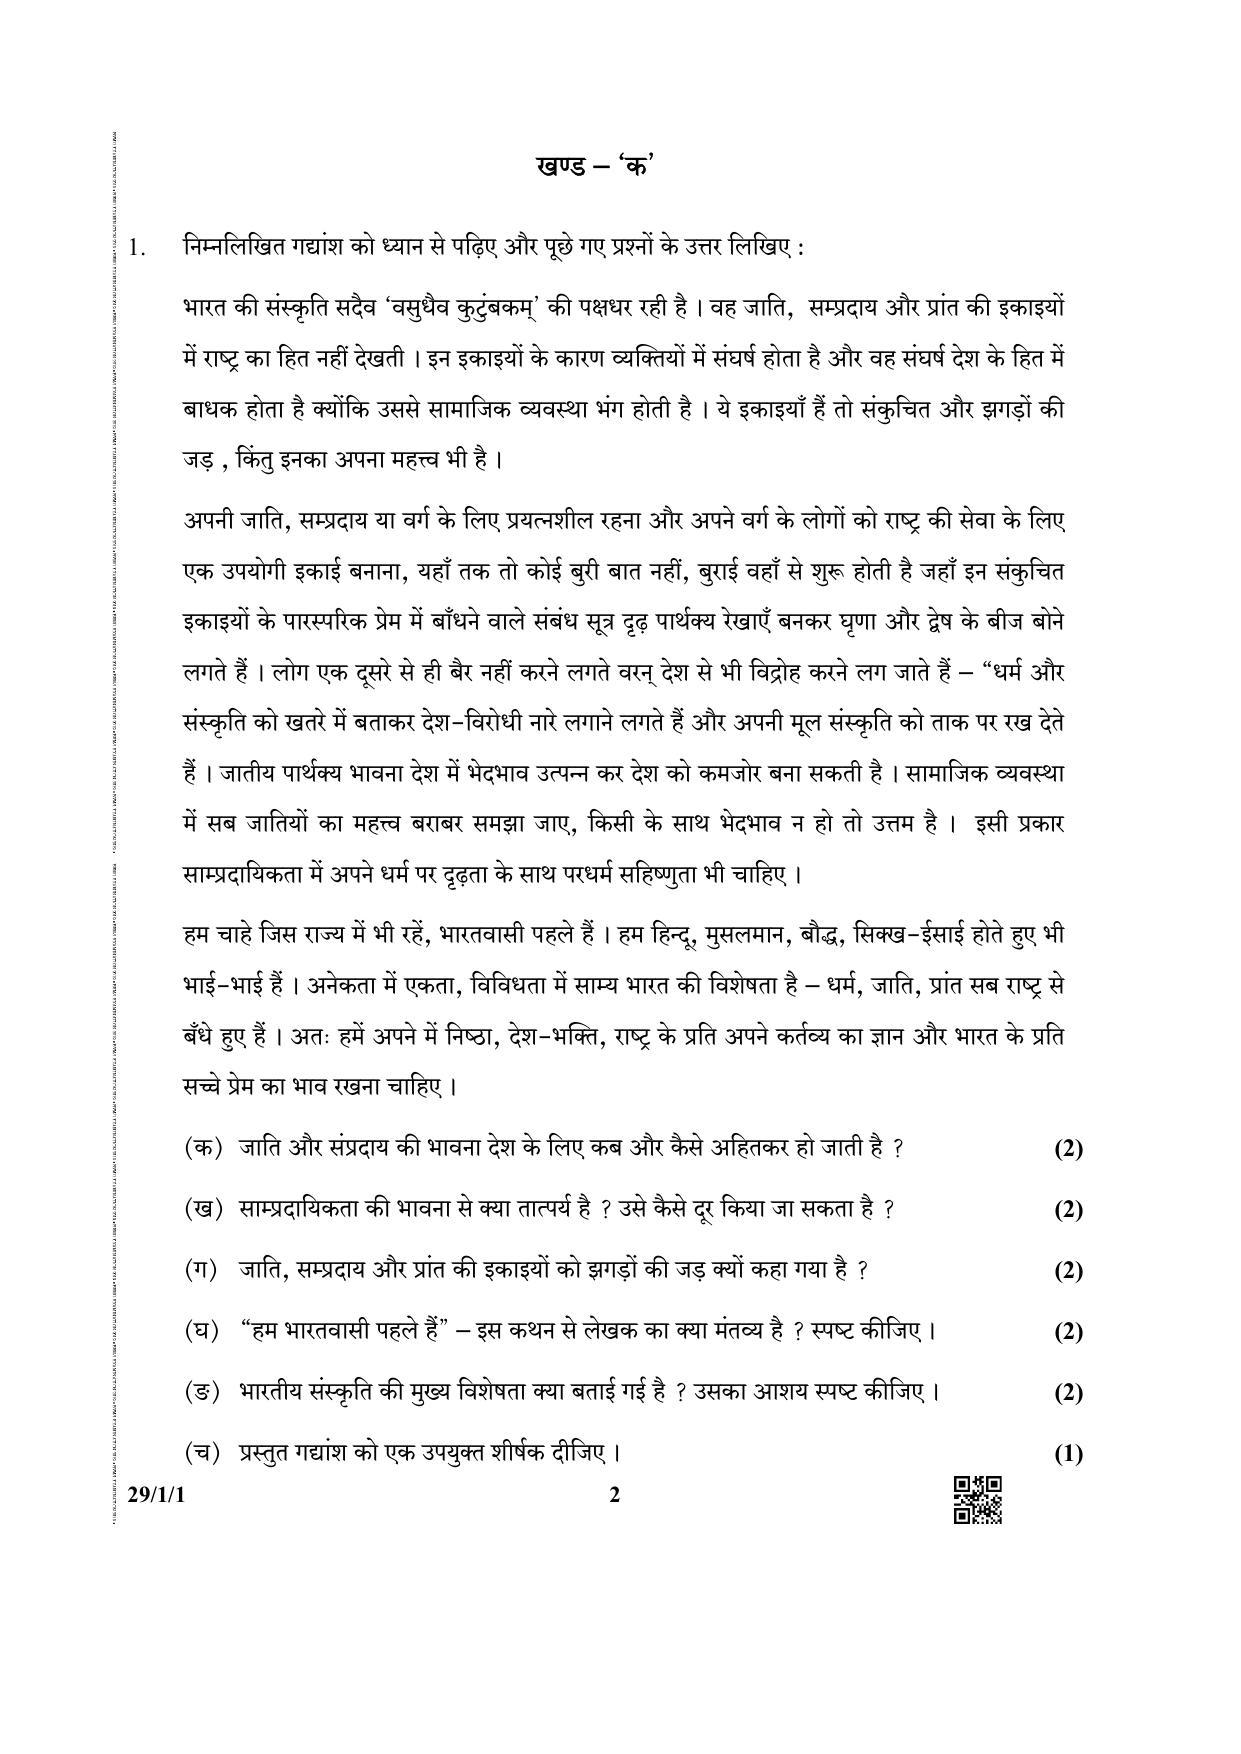 CBSE Class 12 29-1-1 (Hindi ELECTIVE) 2019 Question Paper - Page 2